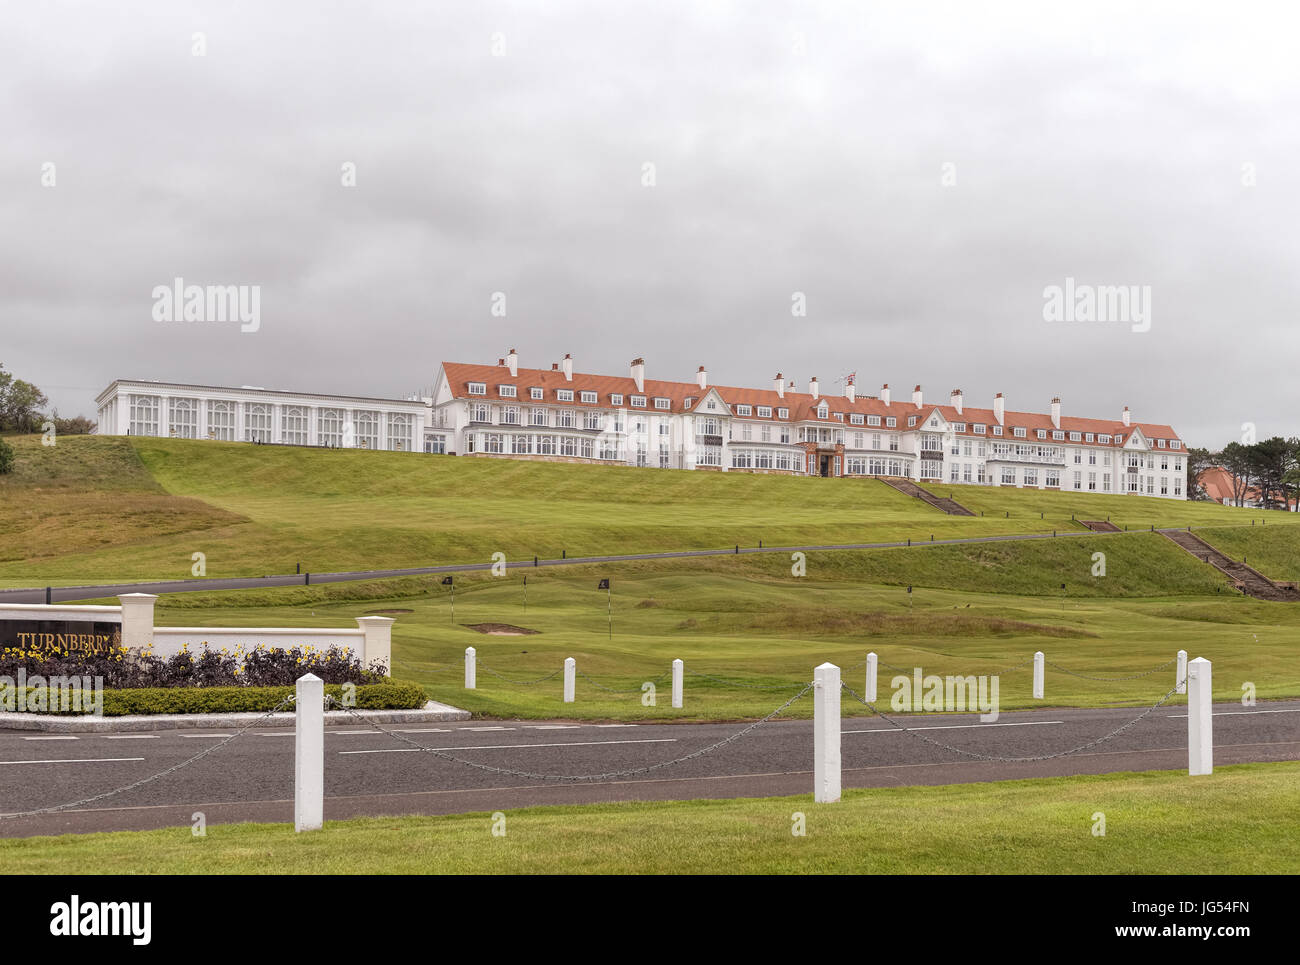 Turnberry,South Ayrshire Scotland-July 1st, 2017: The magestic buildings at Turnberry at the start of summer in Scotland. Stock Photo